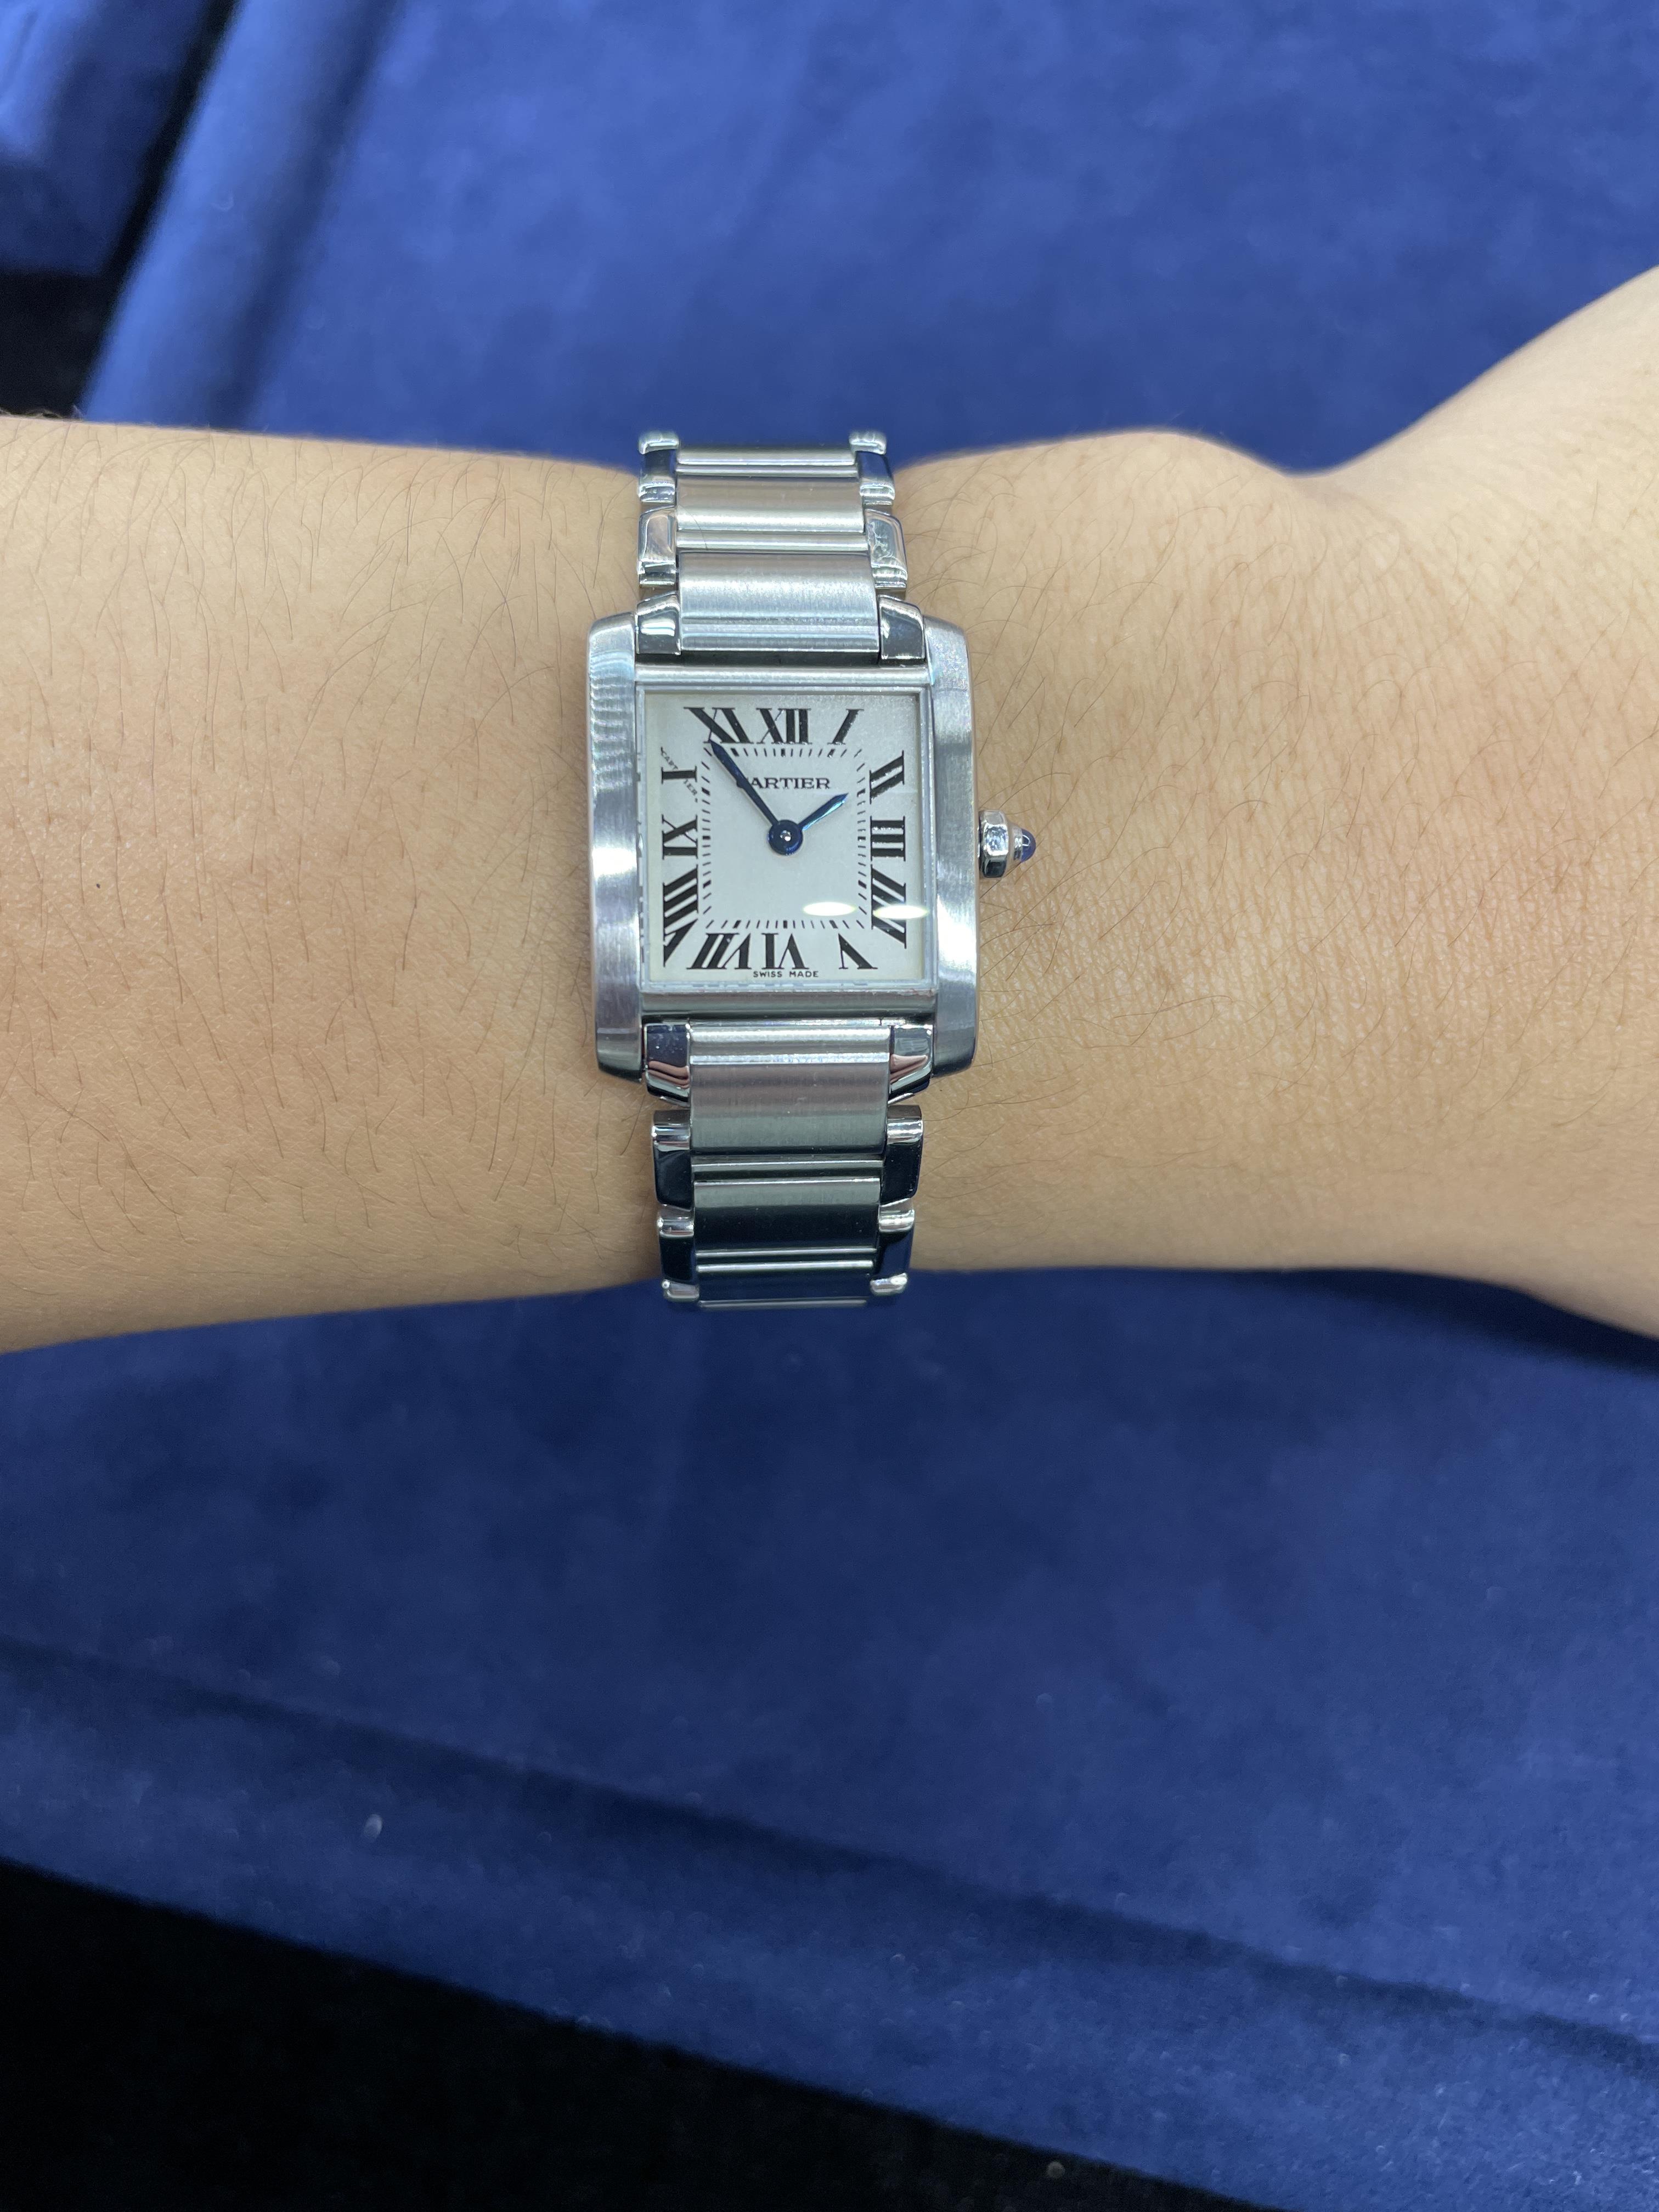 A CARTIER LADIES TANK FRANCAISE STAINLESS STEEL WATCH - Image 5 of 5